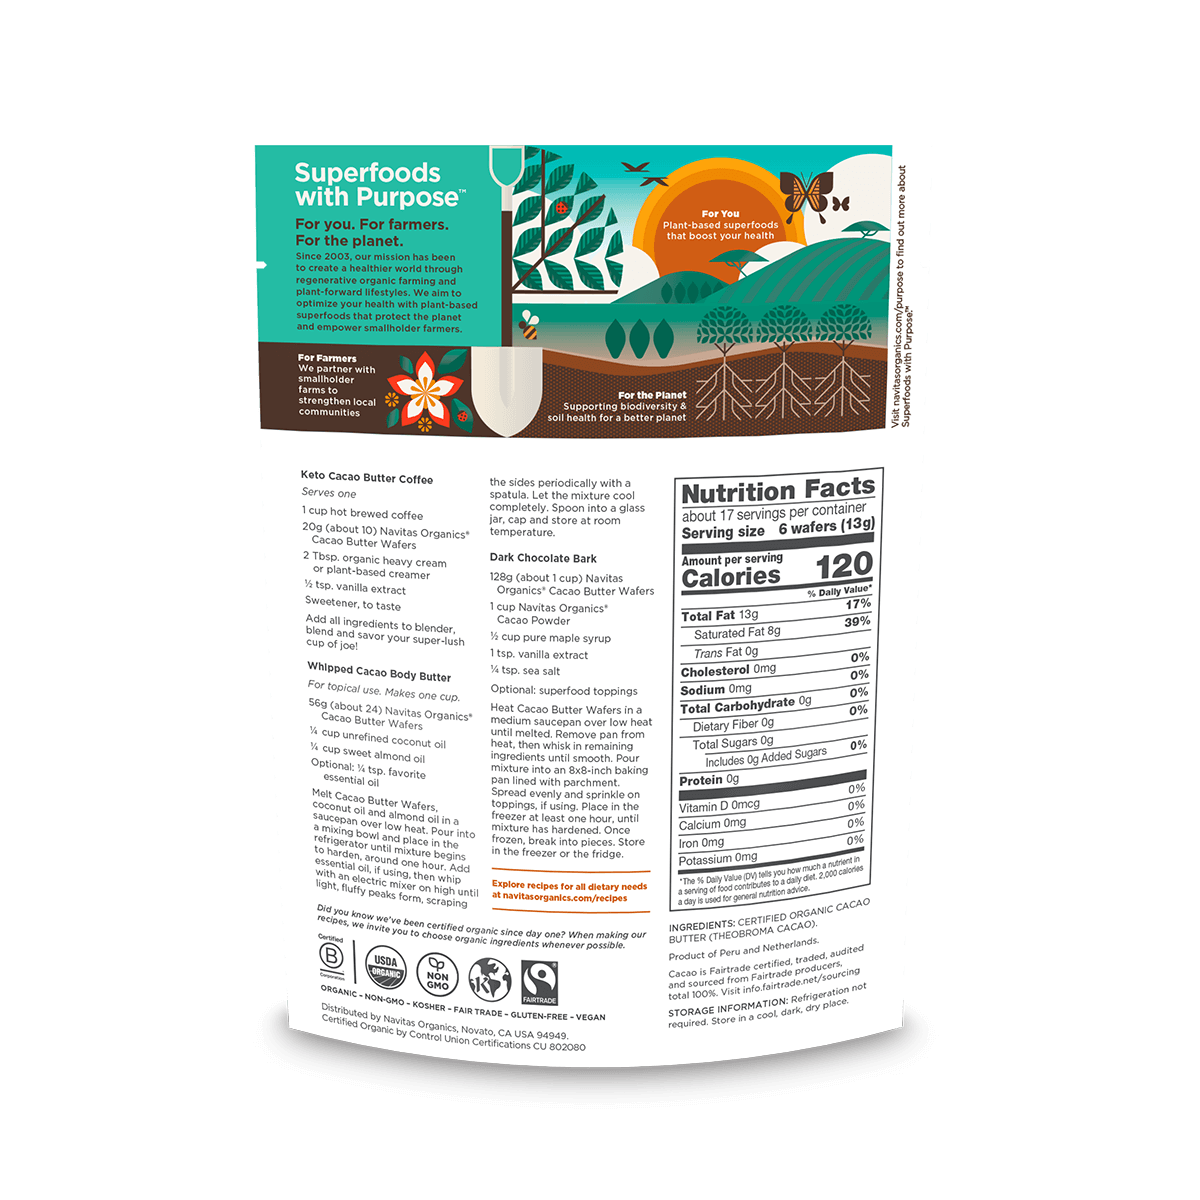 Navitas Organics 8oz Unsweetened Cacao Butter Wafers back of bag